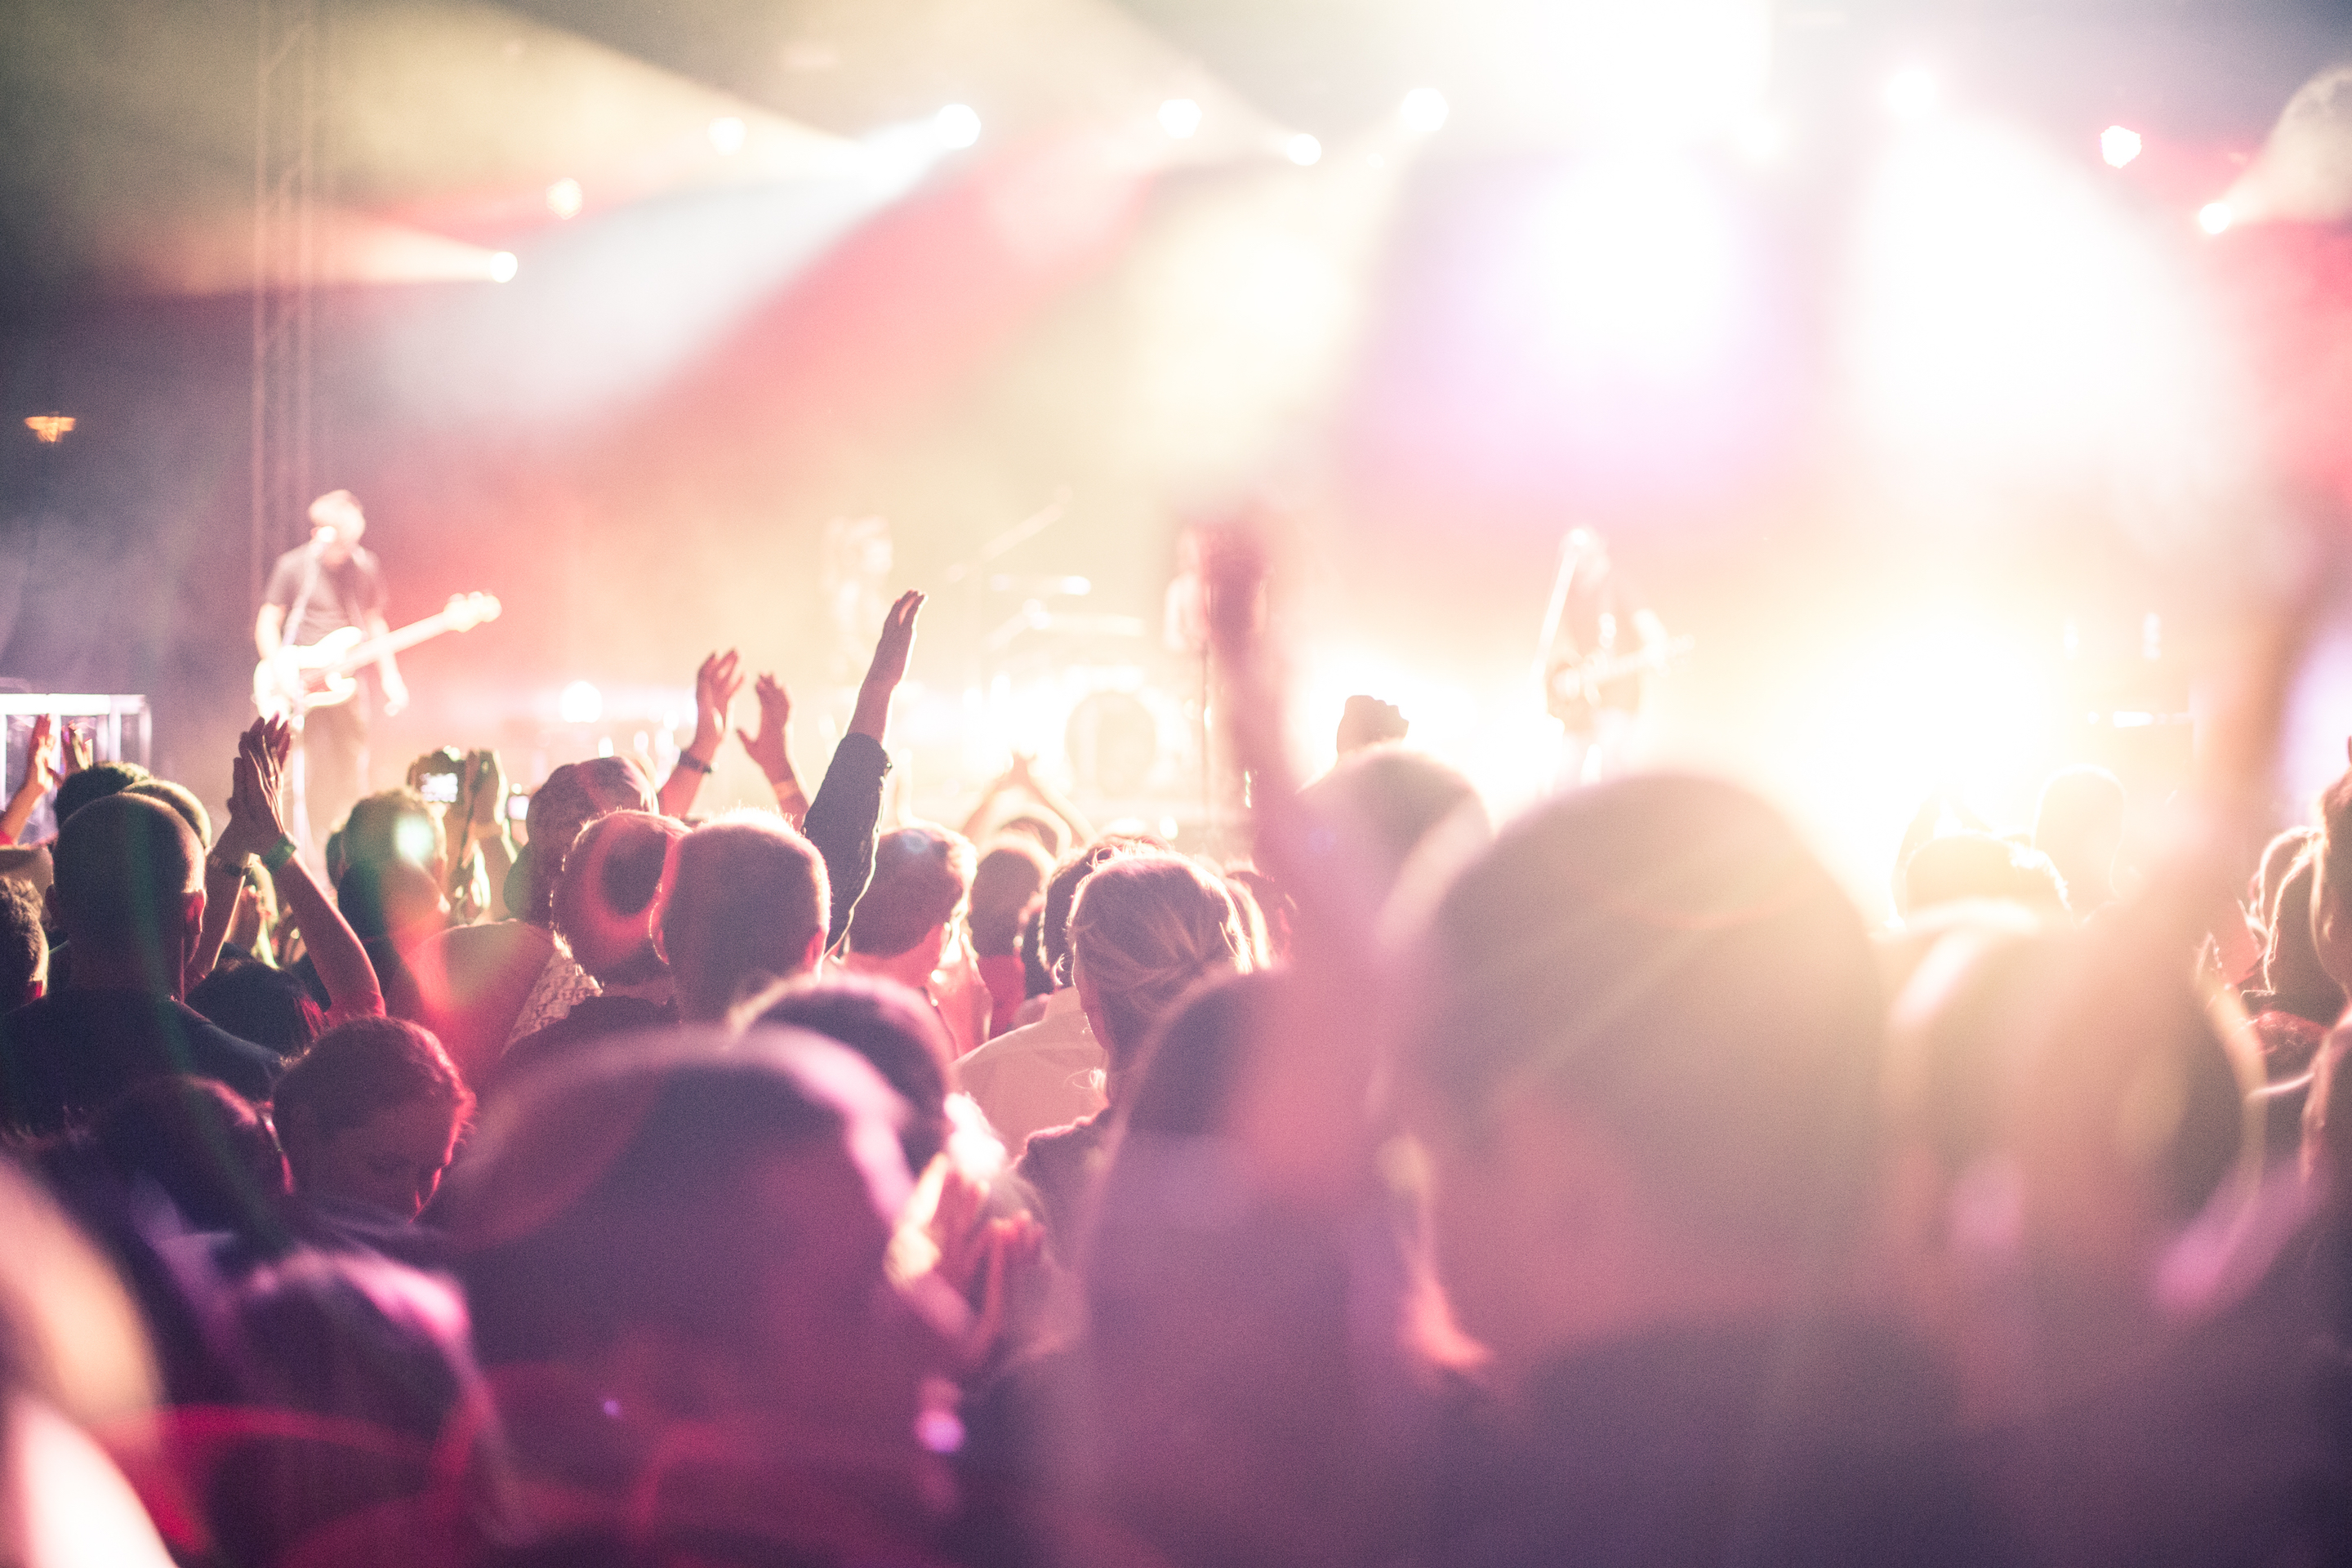 Fans cheer in a crowded space. A band sings on stage under bright lights.